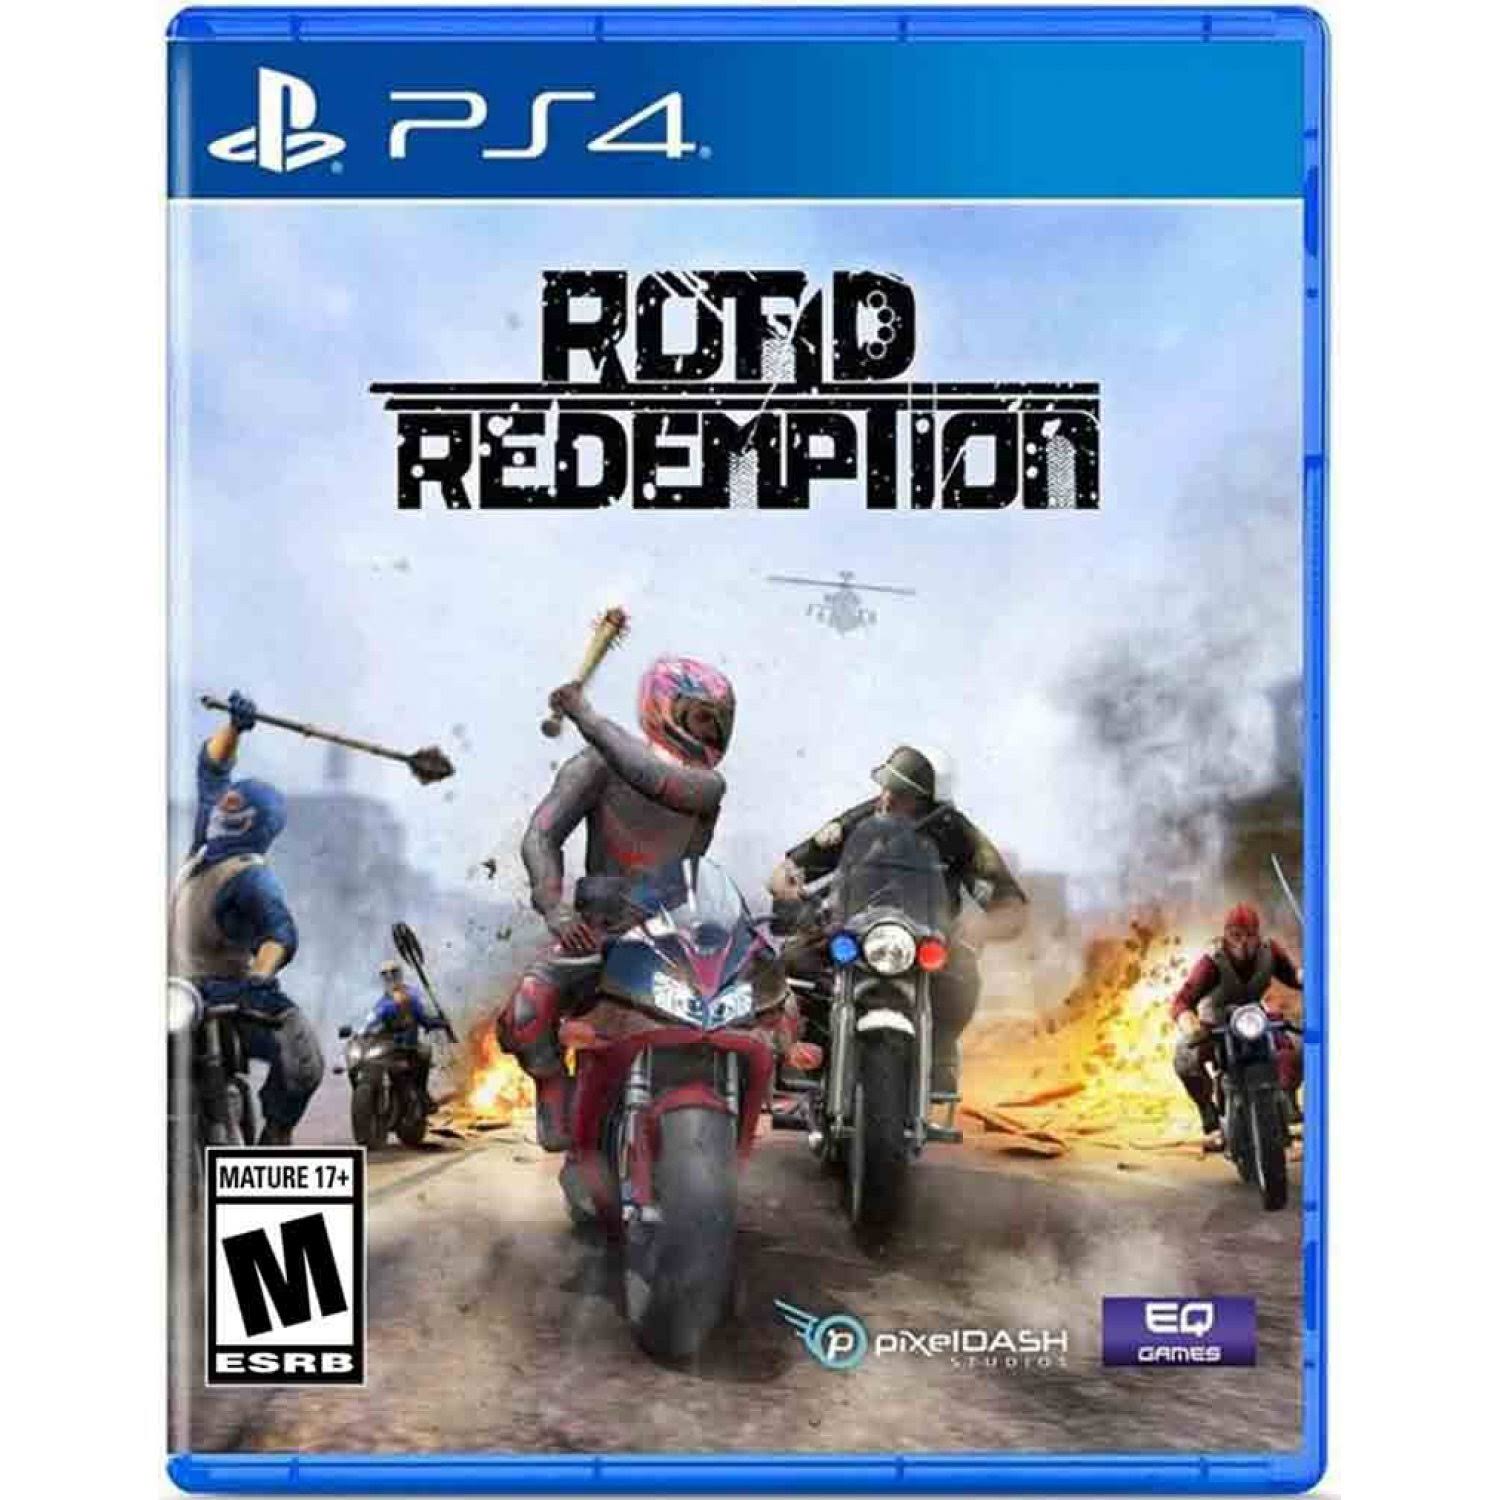 Road Redemption for PS4